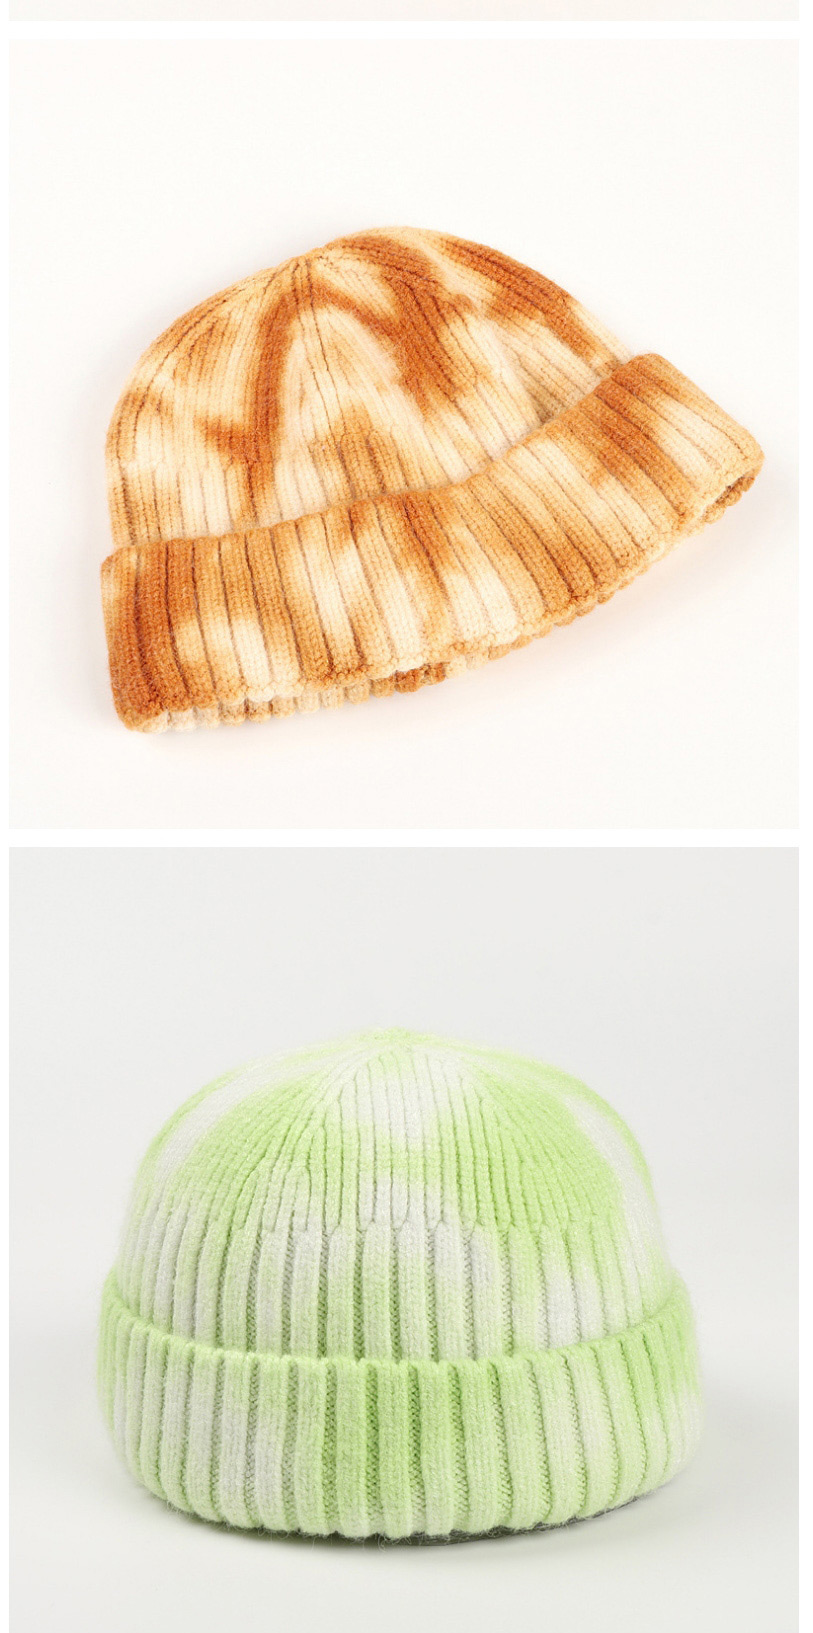 Fashion Caramel Tie-dyed Mohair Curled Knitted Beanie Hat,Knitting Wool Hats